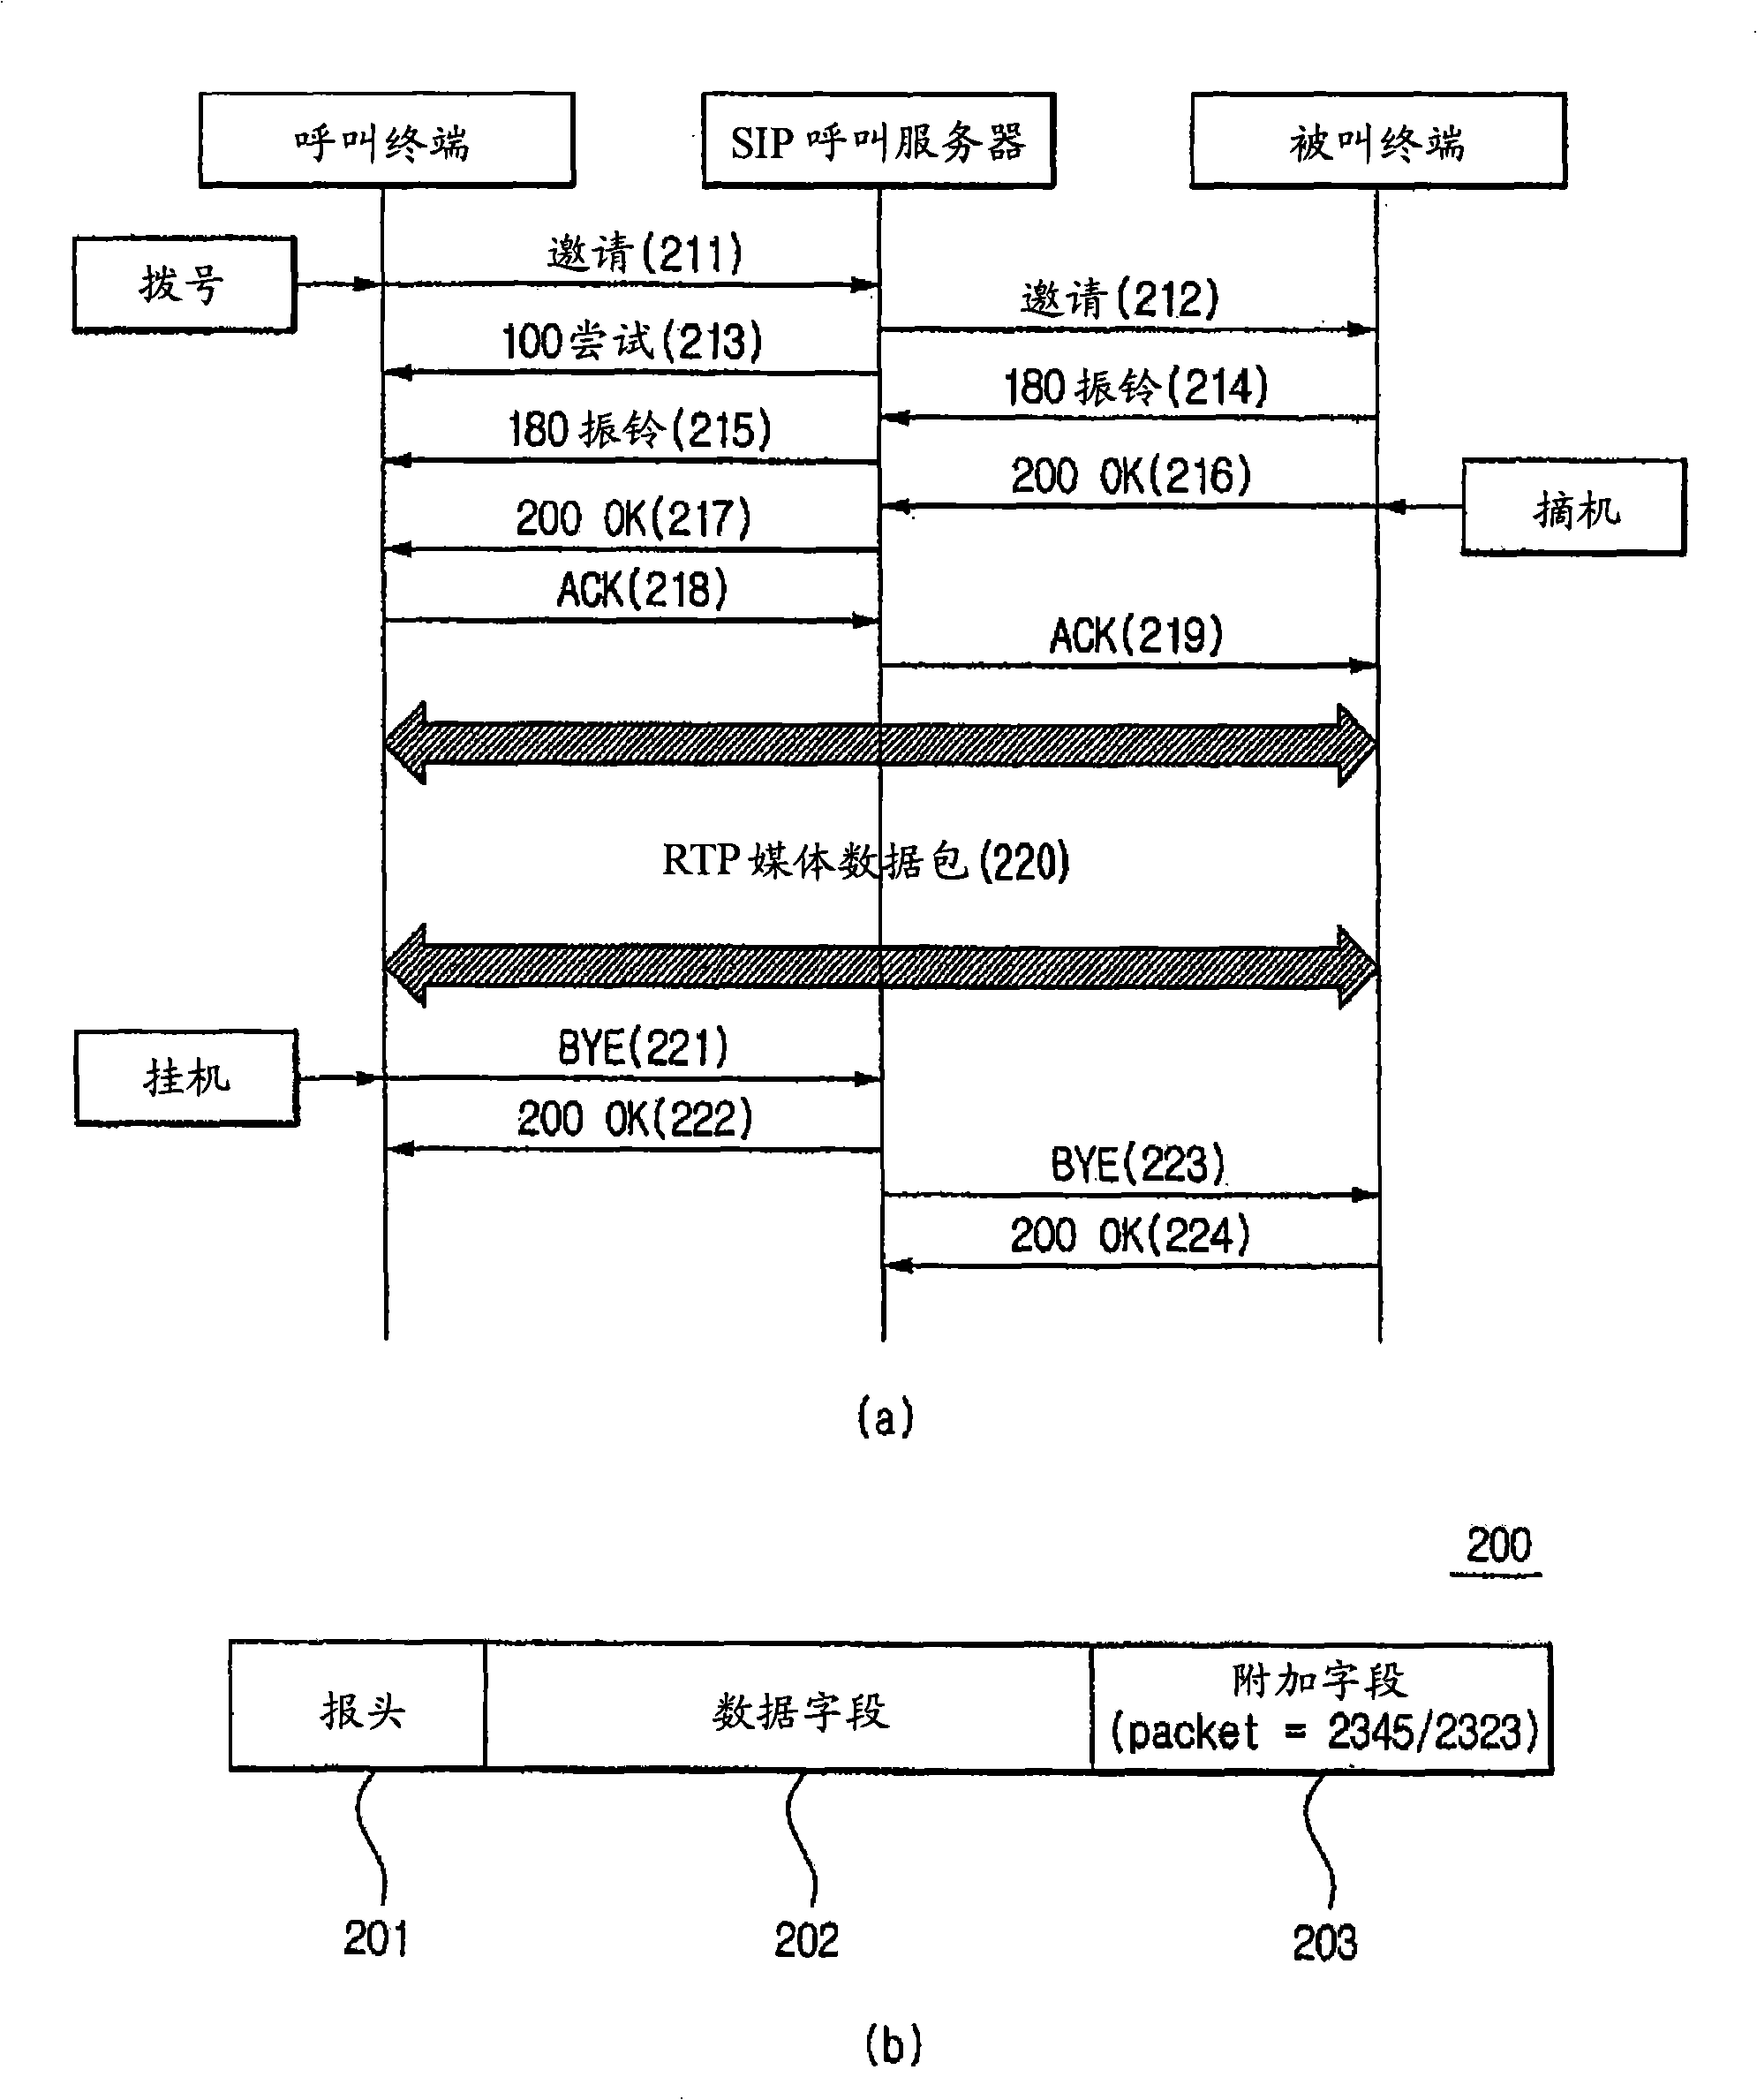 Method for obtaining packet billing information based on session initiation protocol